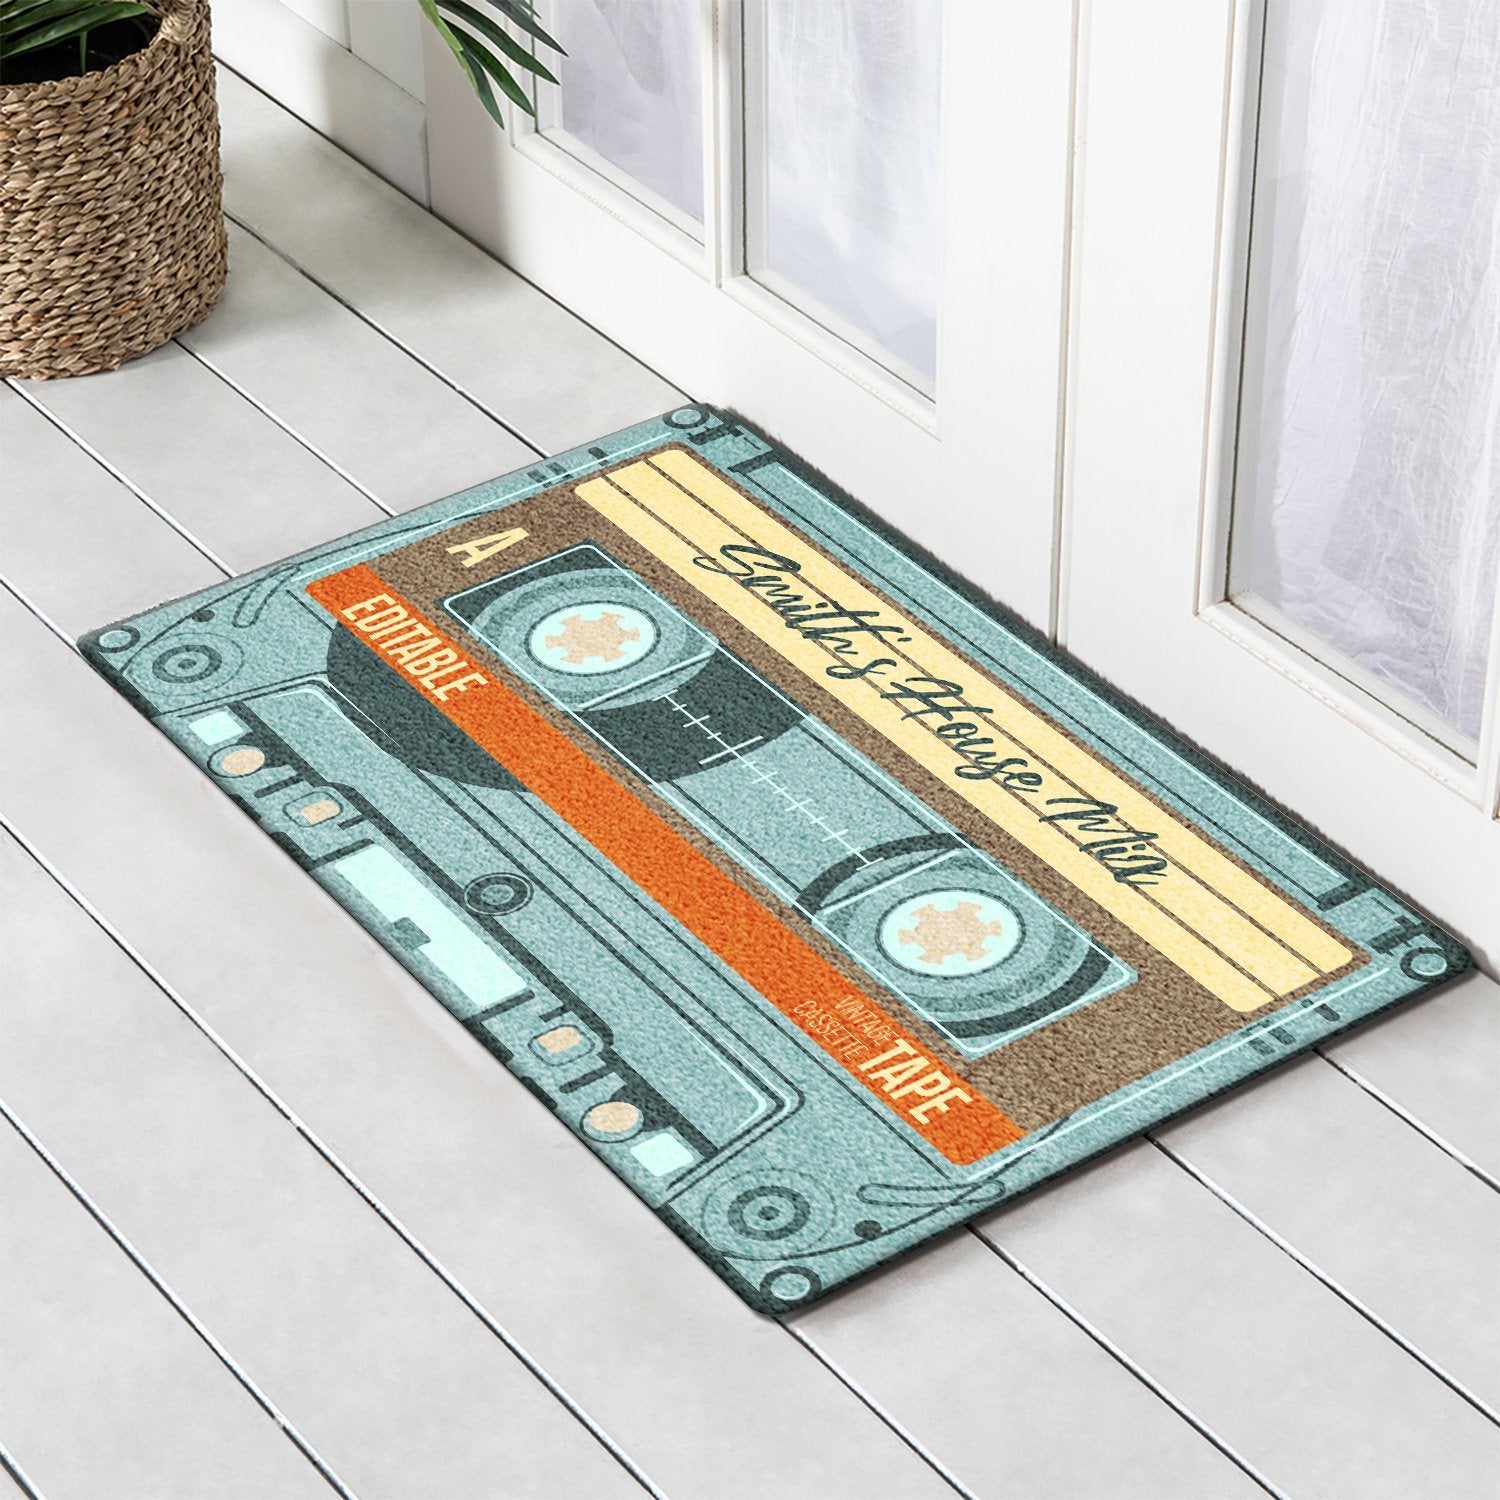  The doormat with cool blue will help keep the house clean.